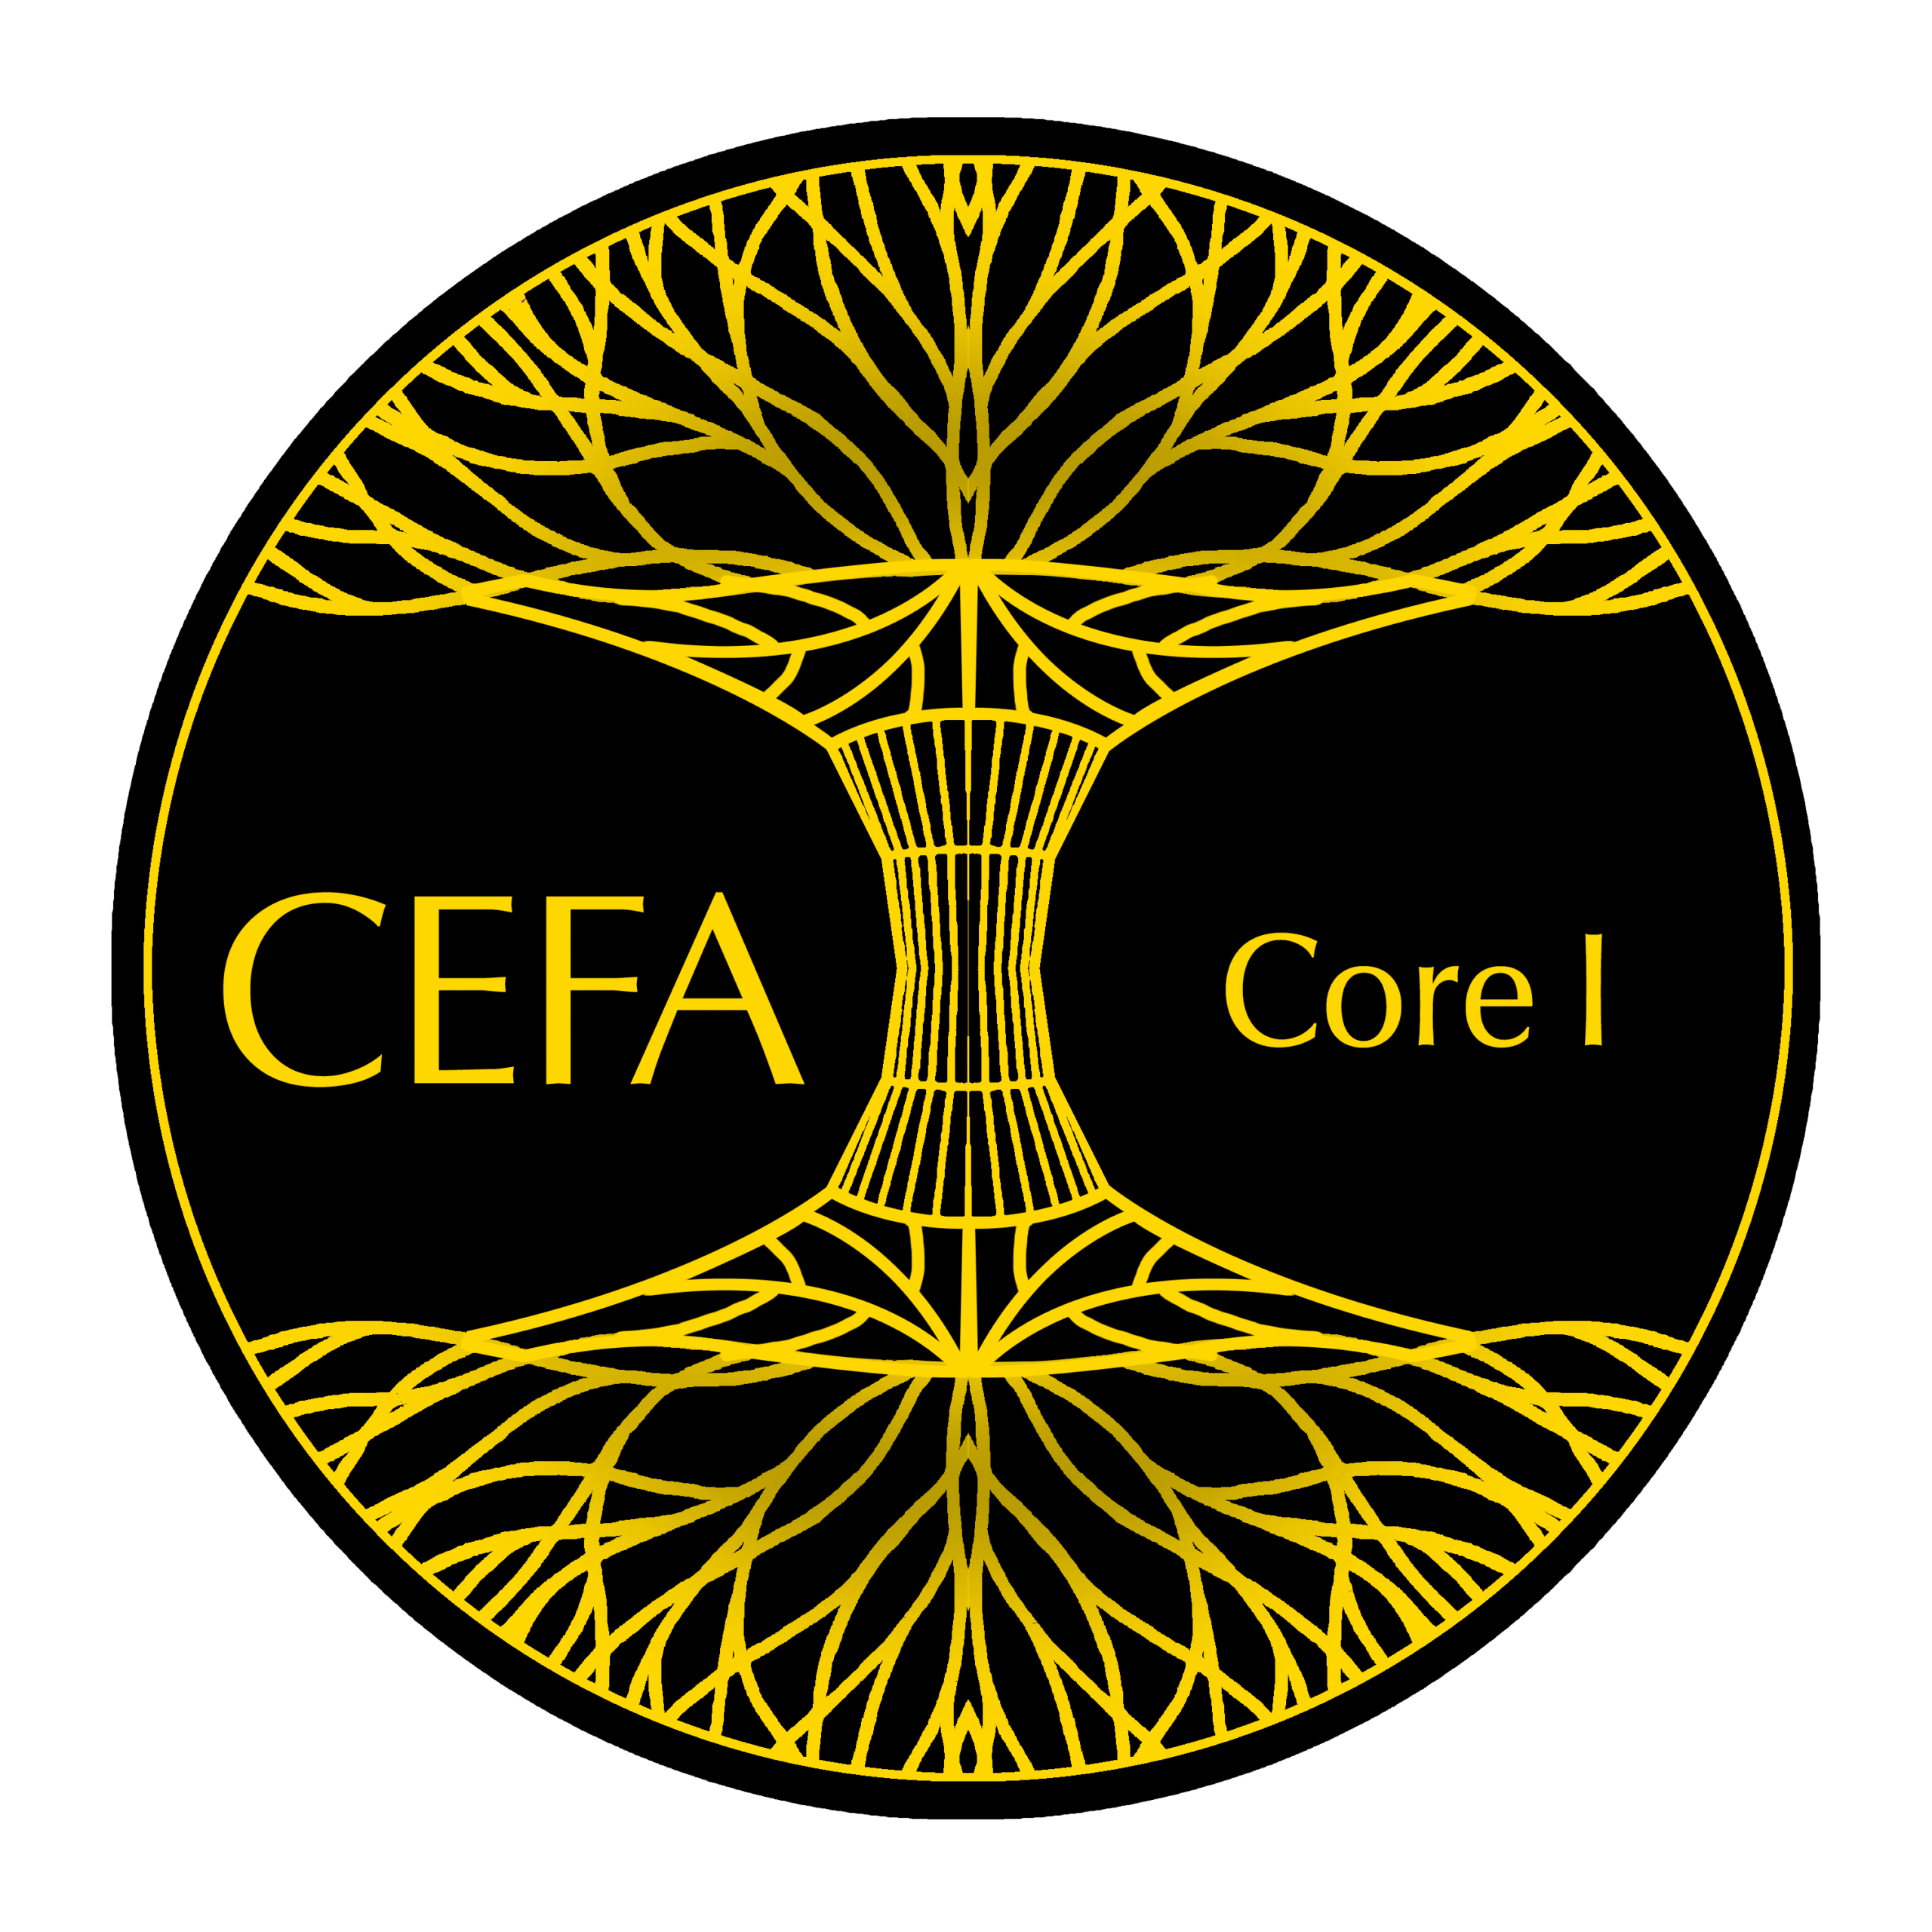 "Creative Energy Field Activation (CEFA) is a multidimensional awakening modality. Held within it is an activation process, an assessment tool, an energetic resourcing practice, a vibrational coherence technique and an alchemical transmutation protocol. The Core I class walks you through an introduction to CEFA with an overview of the modality and a breakdown of its multifaceted parts. Core I training focuses on the inner realm and strengthening your transenergetic core. This phase activates the creative power center and guides you to better understand the heart and breath connection. Learn to access an instant sense of calm, confidence, and creativity while feeling an elevated connection to the world and all within it. #CEFA #CreativeEnergyFieldActivation #Creativity #Energy #power #Transformation #training #personalDevelopment #mastery #certification #core #intelligence #wisdom #foundation #connection #emotion #health #mental #healing #coaching #spiritual #community #superpowerexperts "